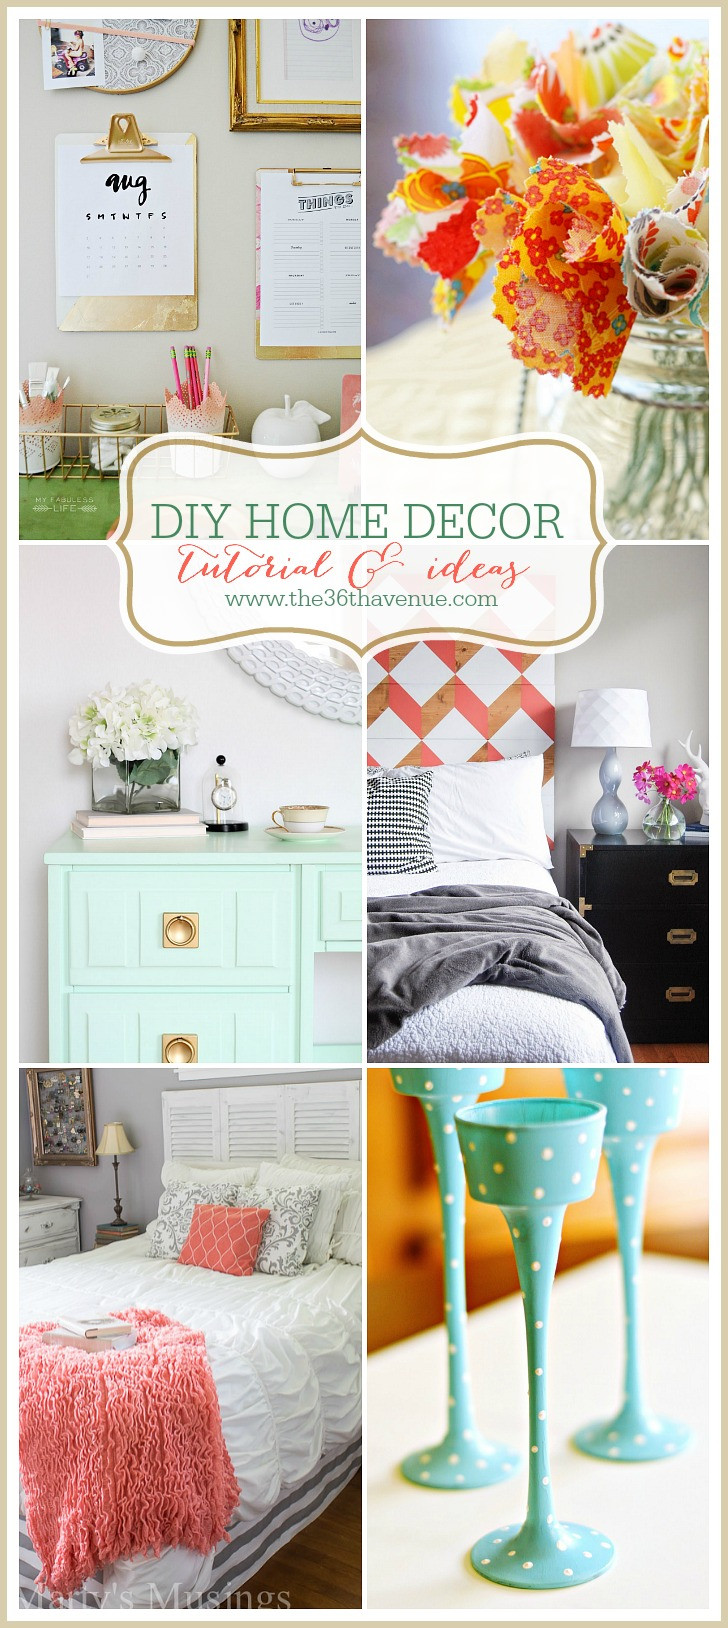 Diy Decorating Ideas
 The 36th AVENUE Home Decor DIY Projects